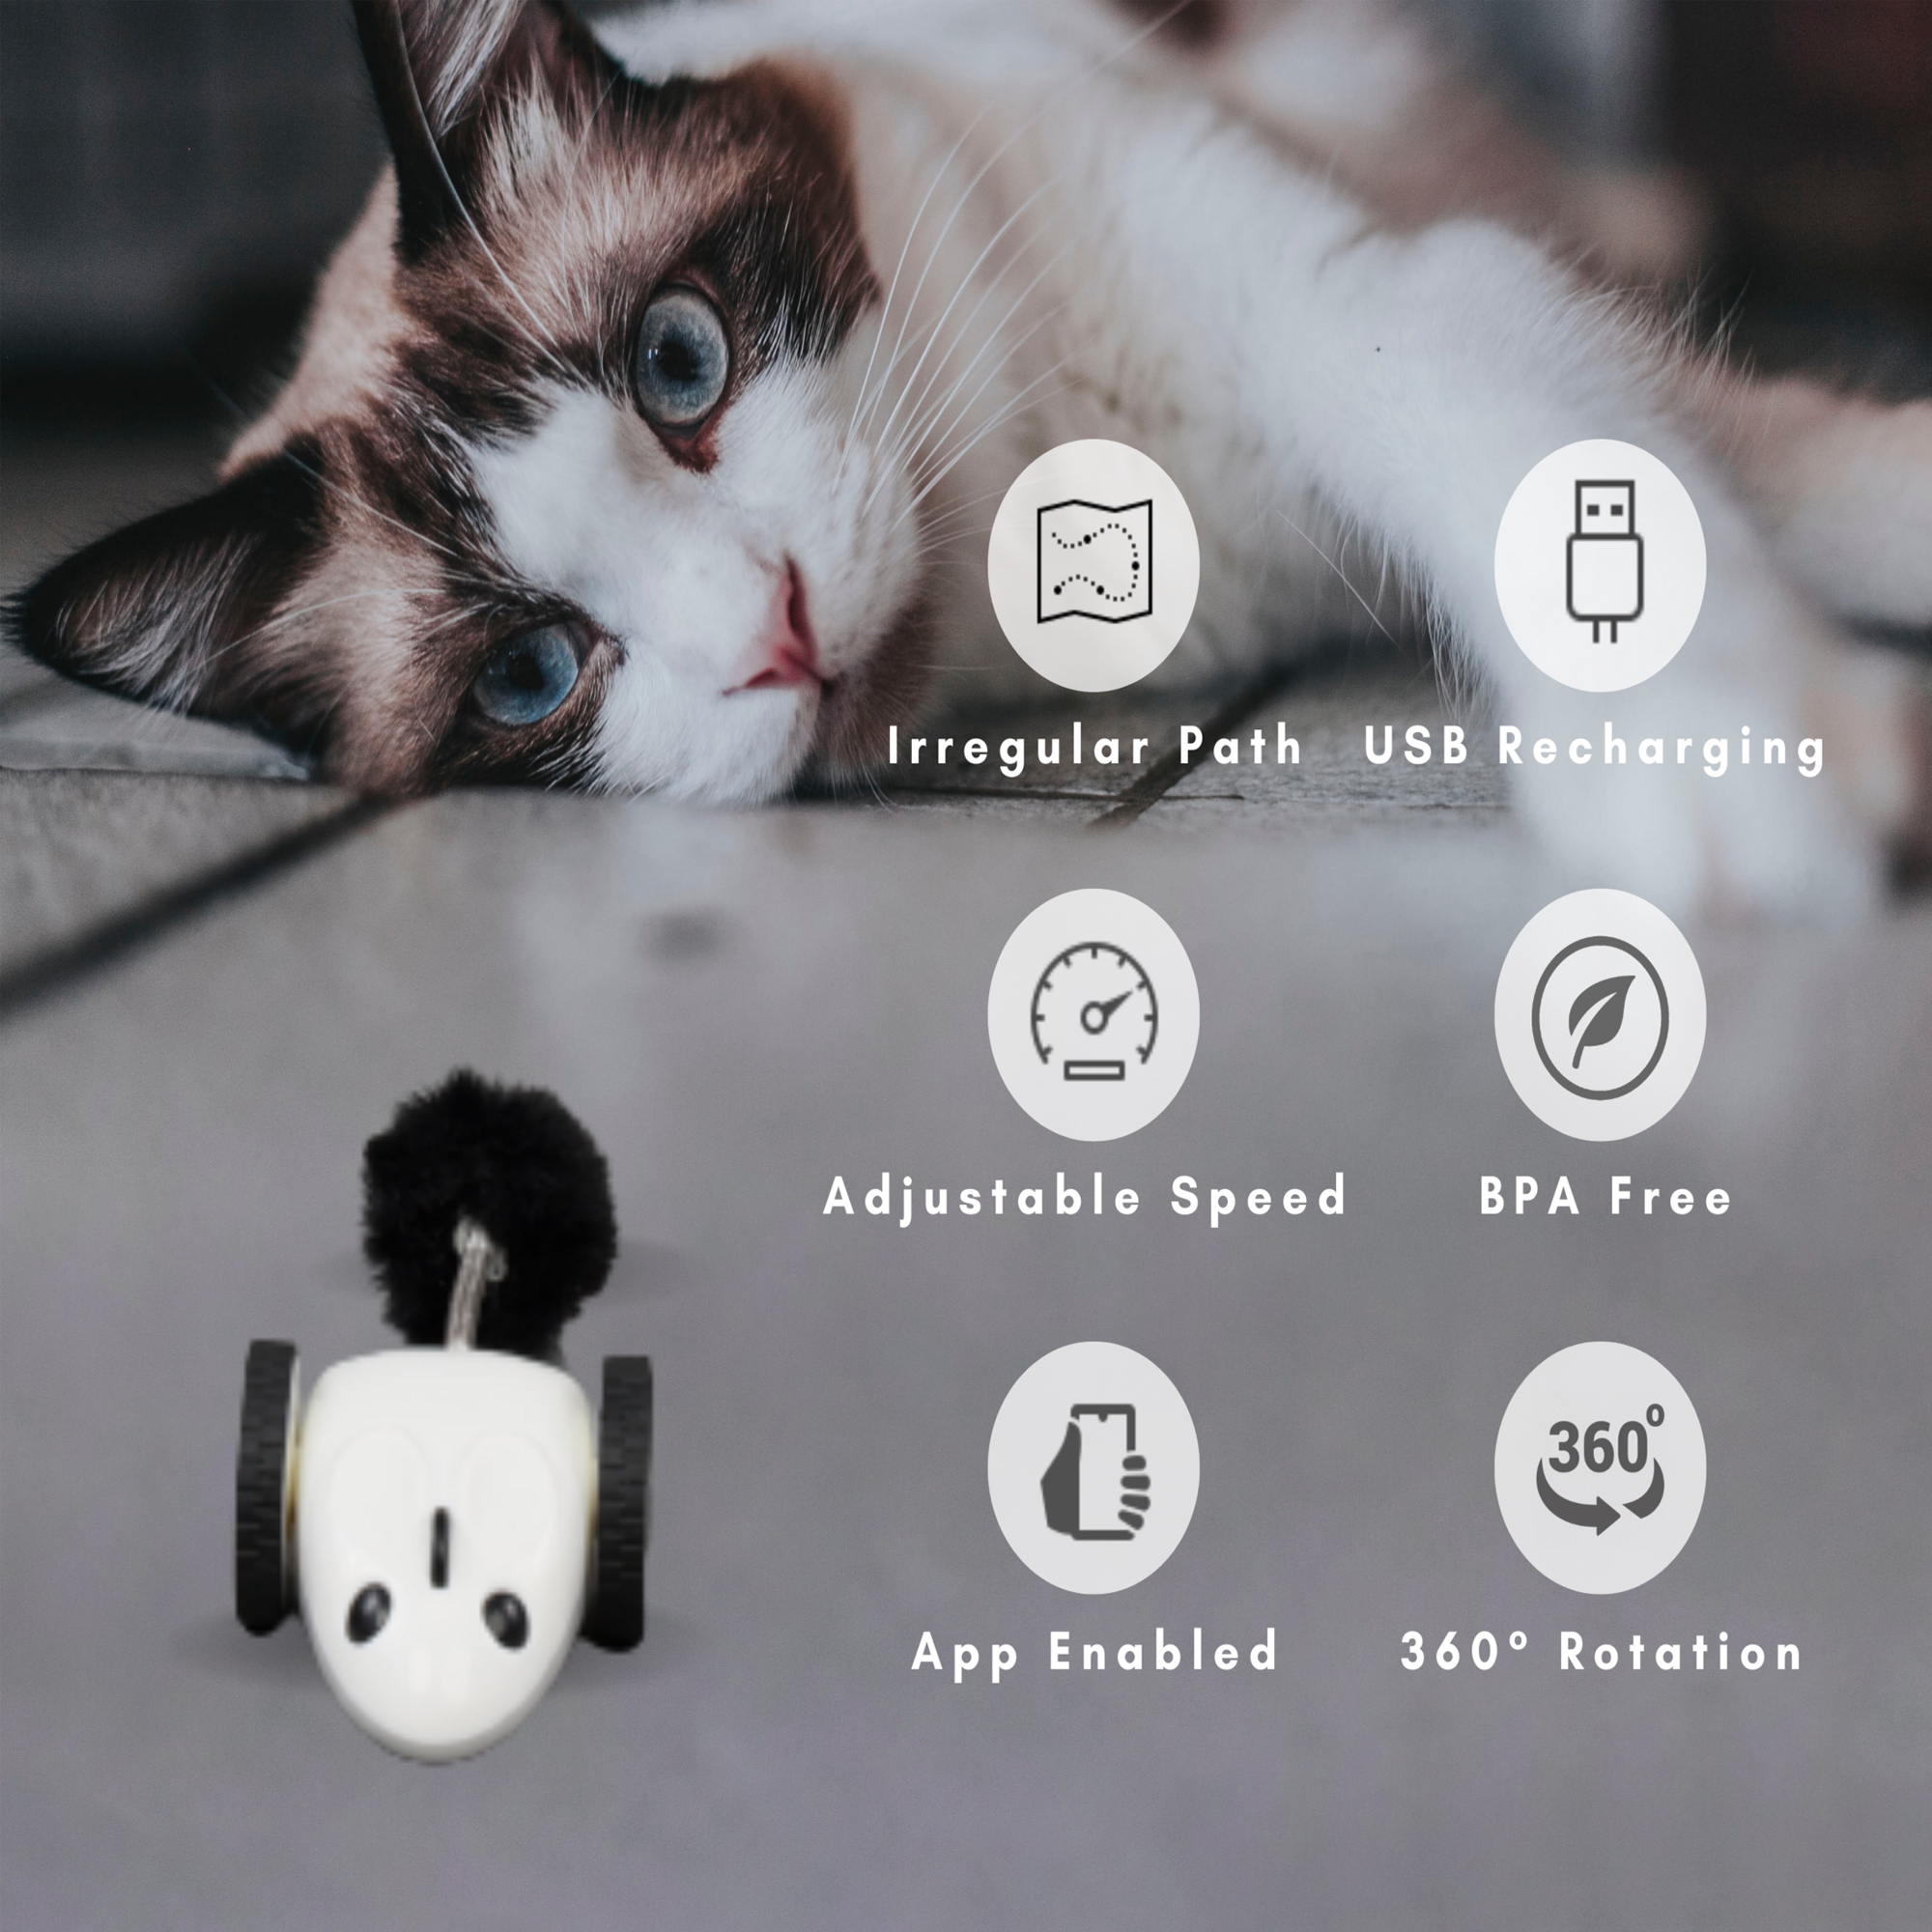 Instachew Purechase Smart Cat Toy, Interactive Automatic Mouse shaped Toy for Pets, App Enabled with Adjustable Speed, Flip Modes, Replaceable Plush Tail and USB Charging for Kittens and Dogs - image 2 of 8